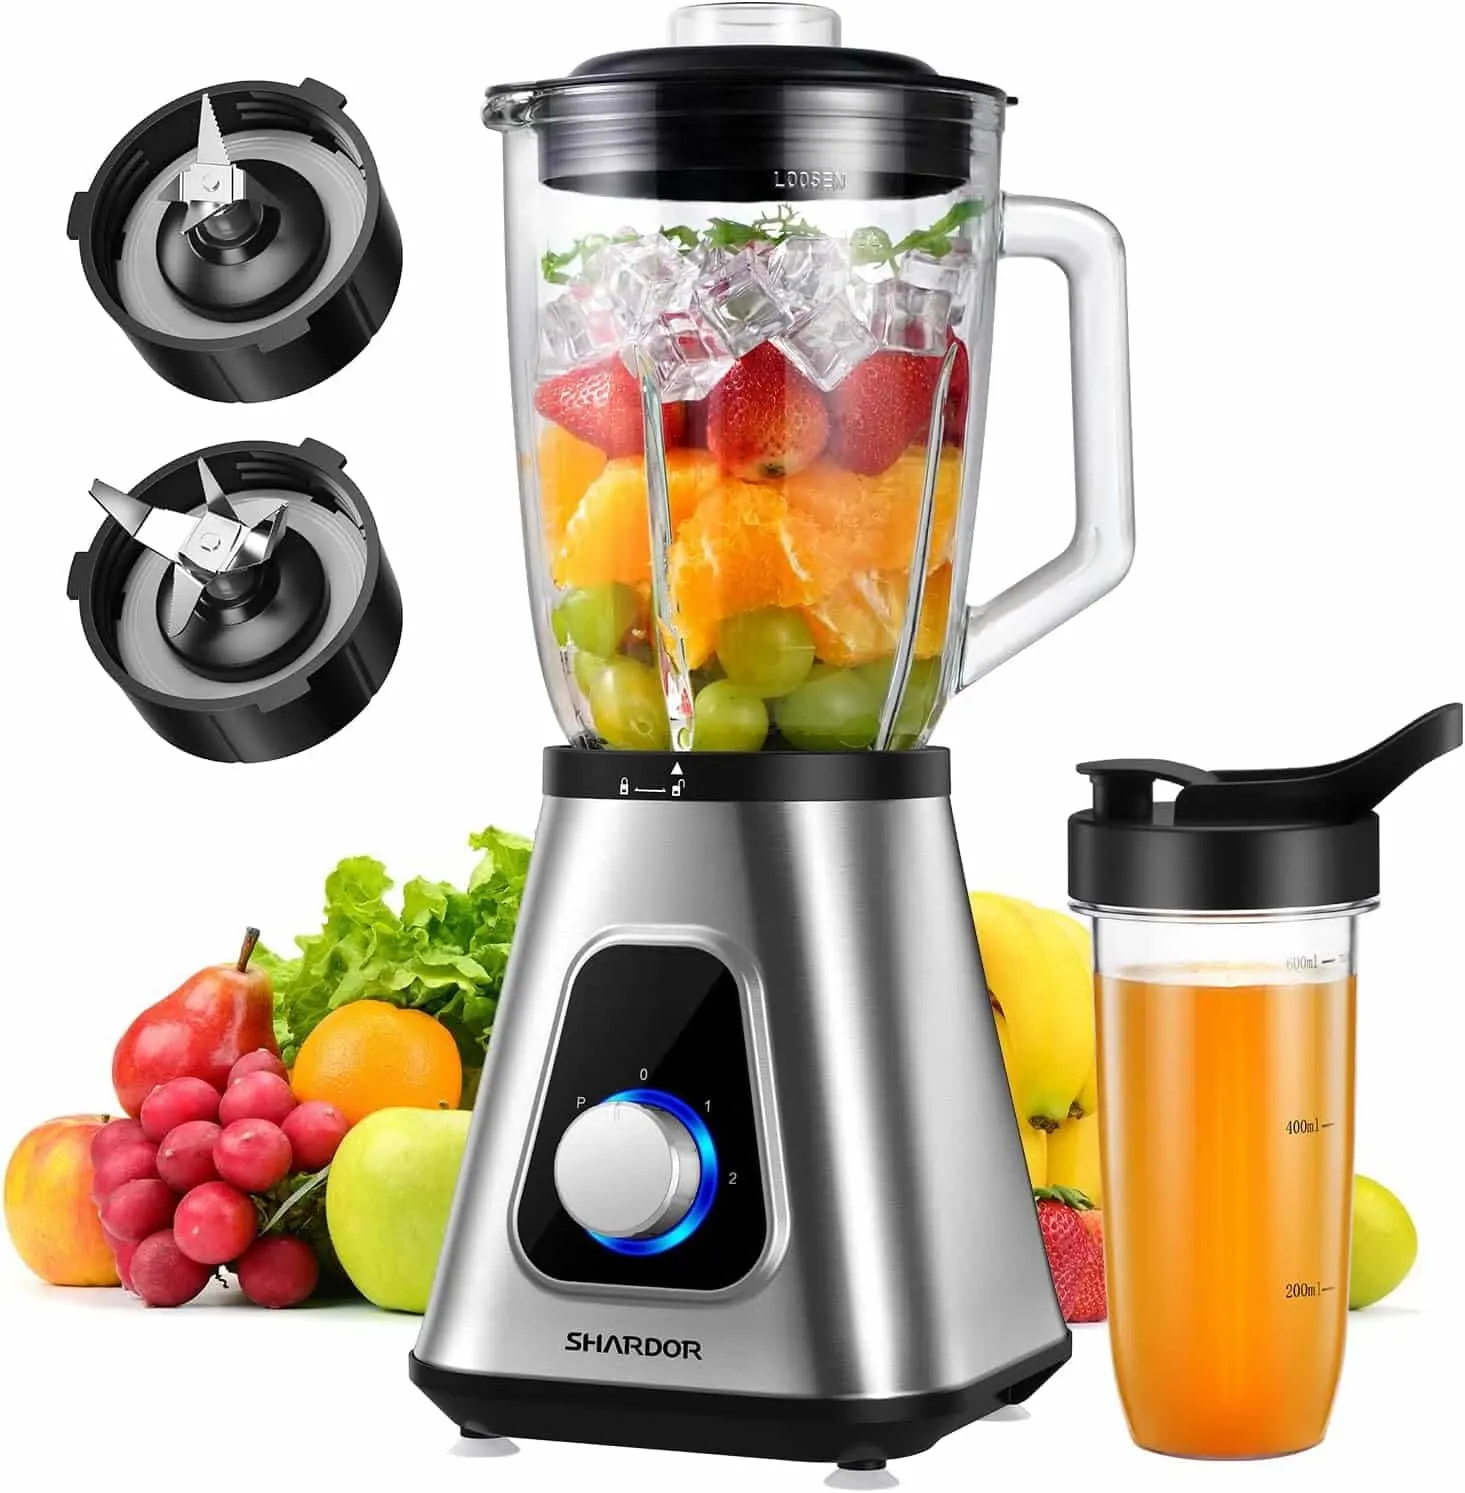  Professional high speed Blender, Personal Blender for Shakes  and Smoothies,Powerful 1500-Watt Blender for Juice, Soups, frozen drinks  and More, Stainless Steel Blades, Easy Self-Cleaning: Home & Kitchen